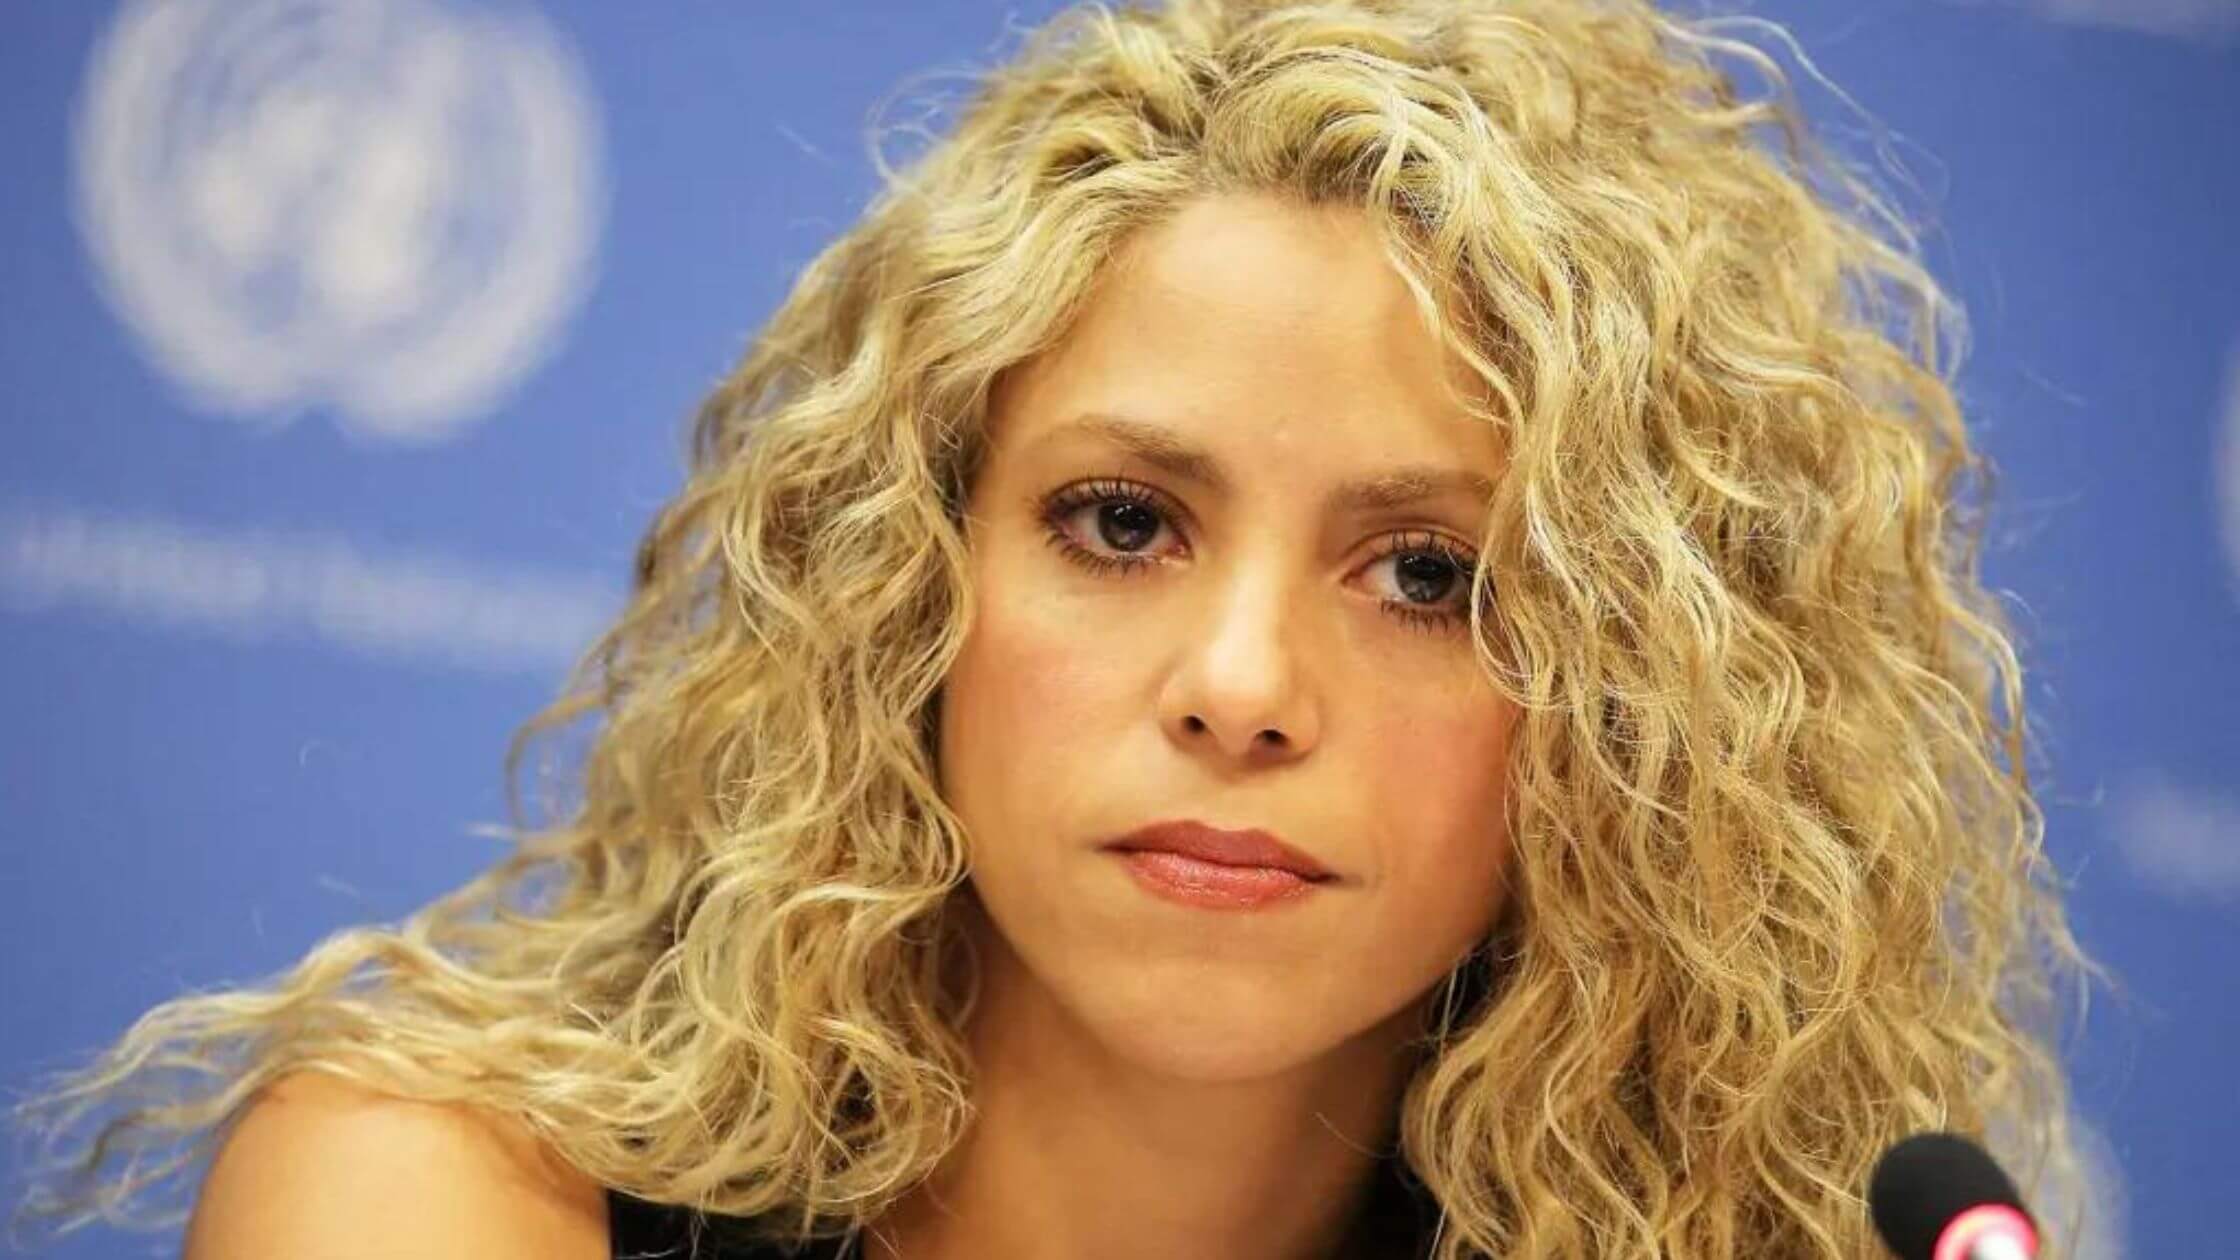 All About Shakira Net Worth, Husband, Children, Career, Bio, Age, Height, And More